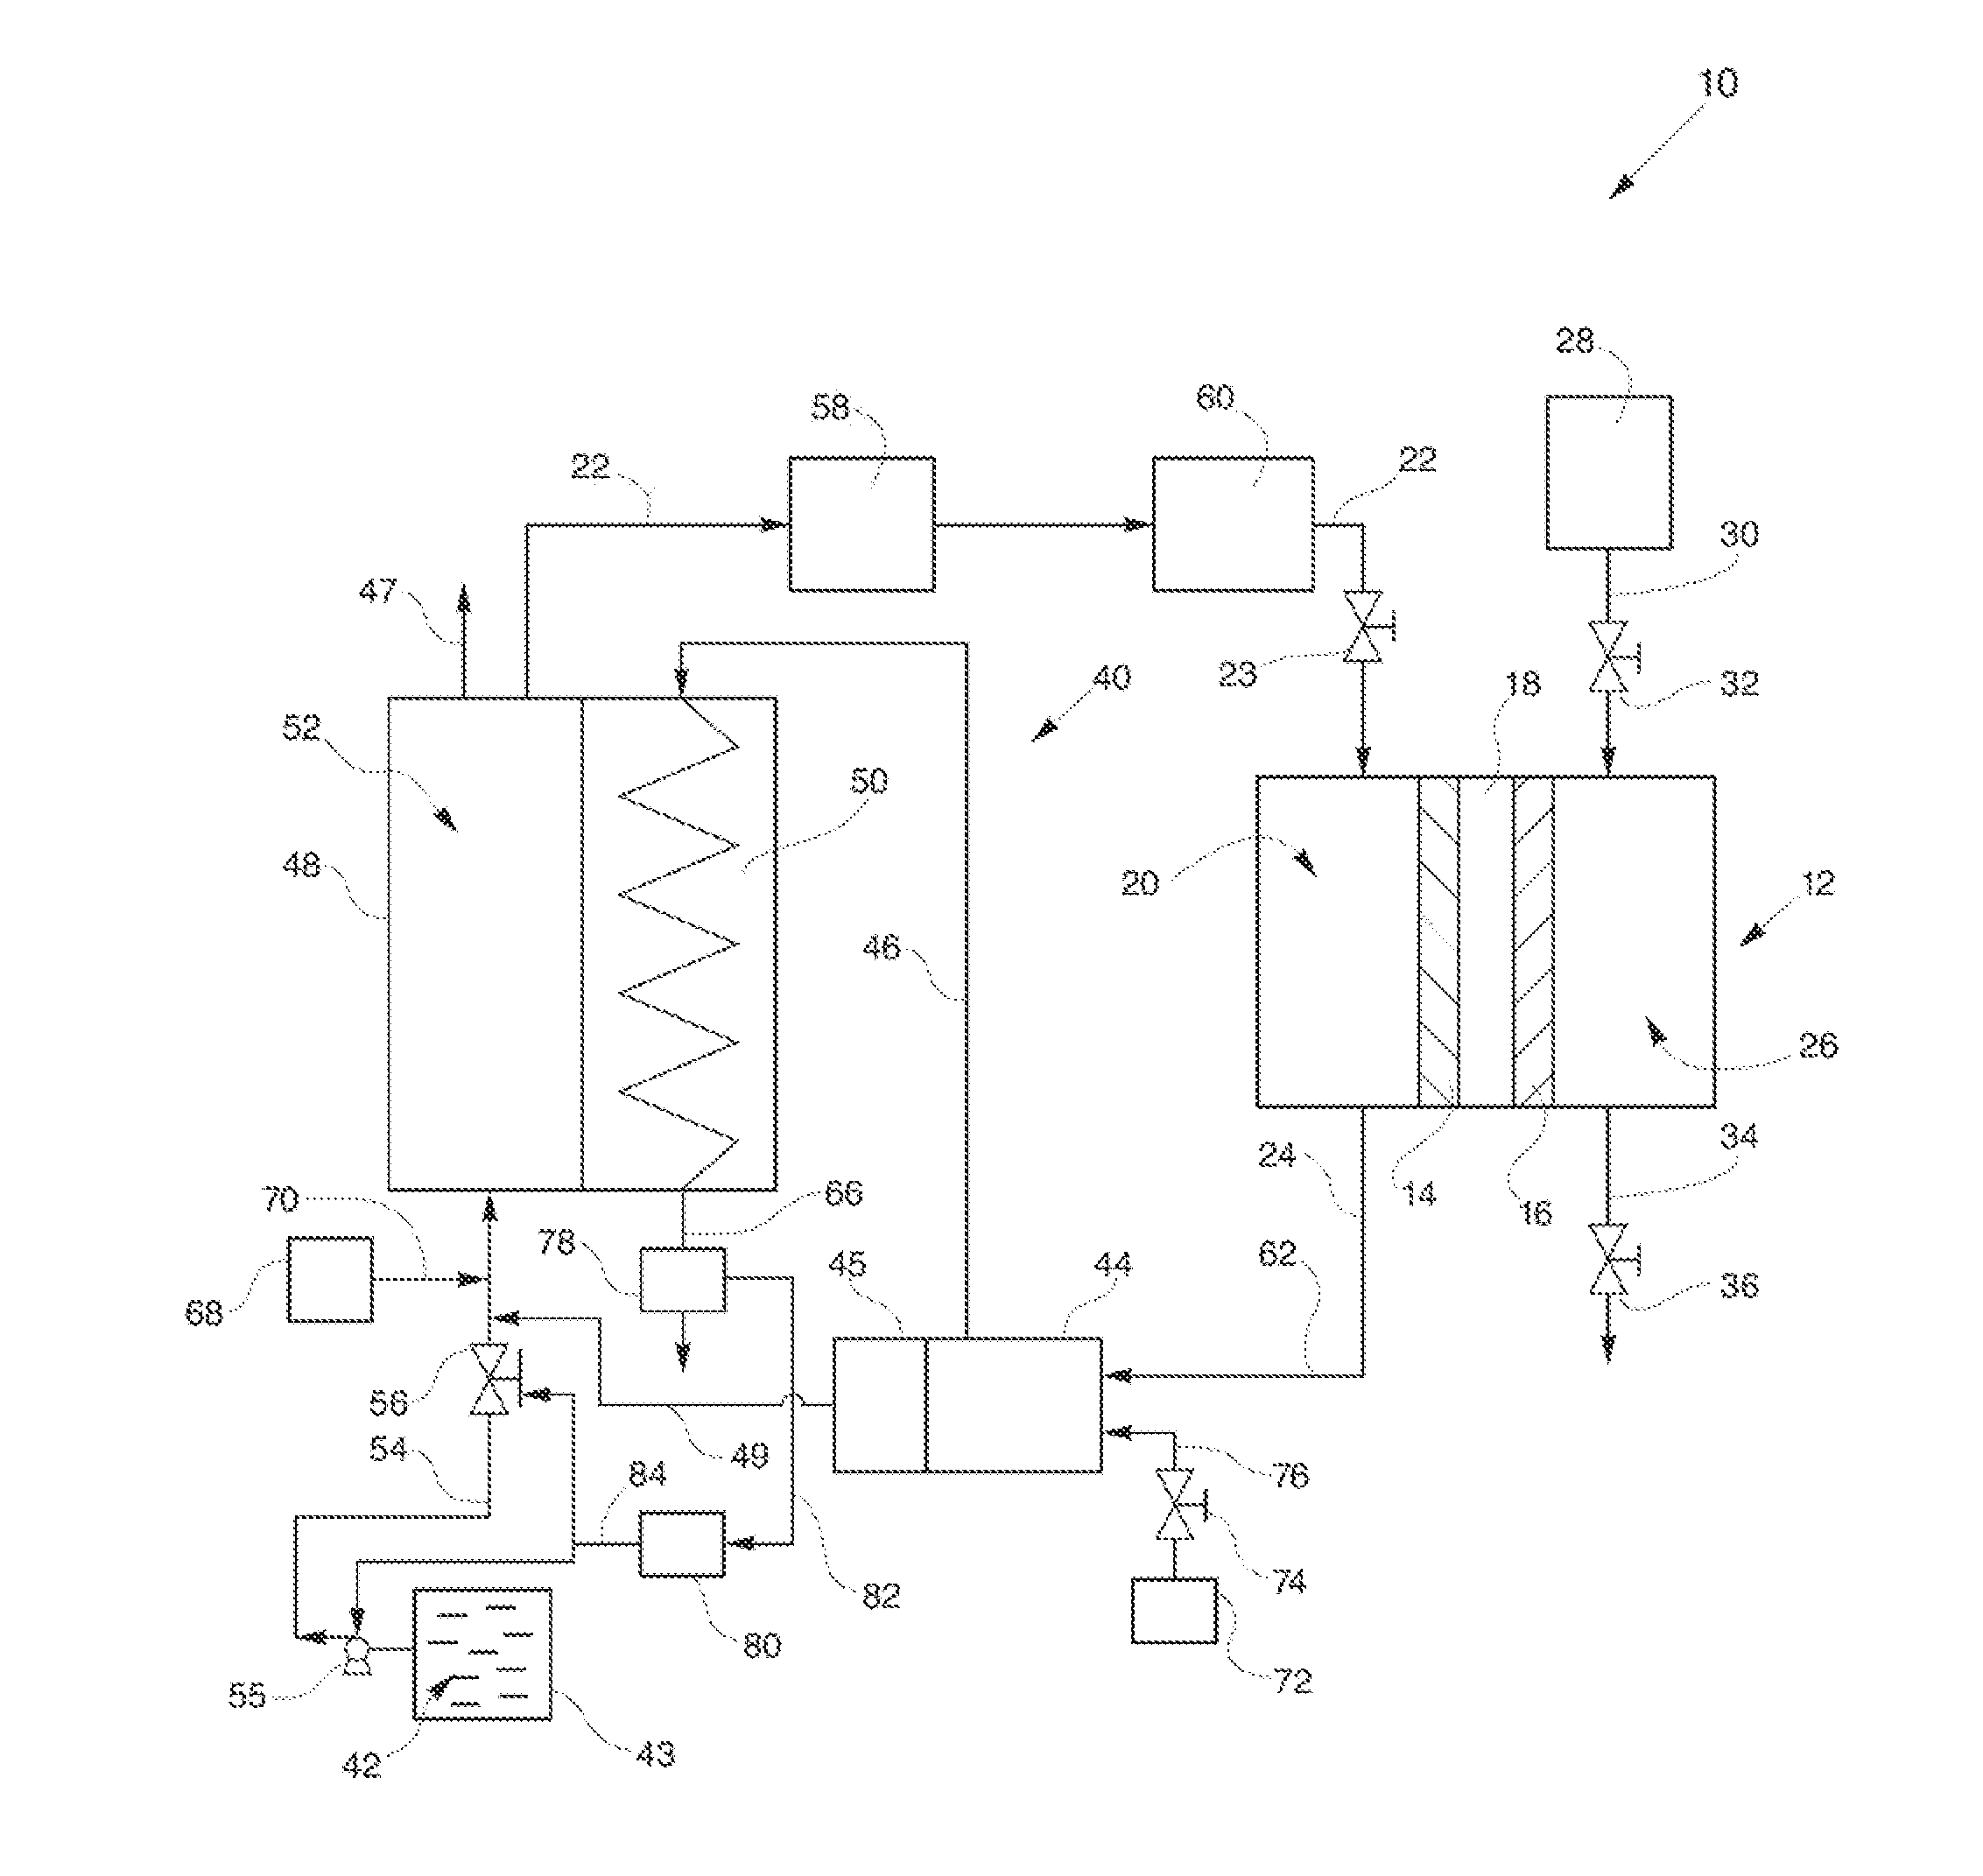 Anode utilization control system for a fuel cell power plant